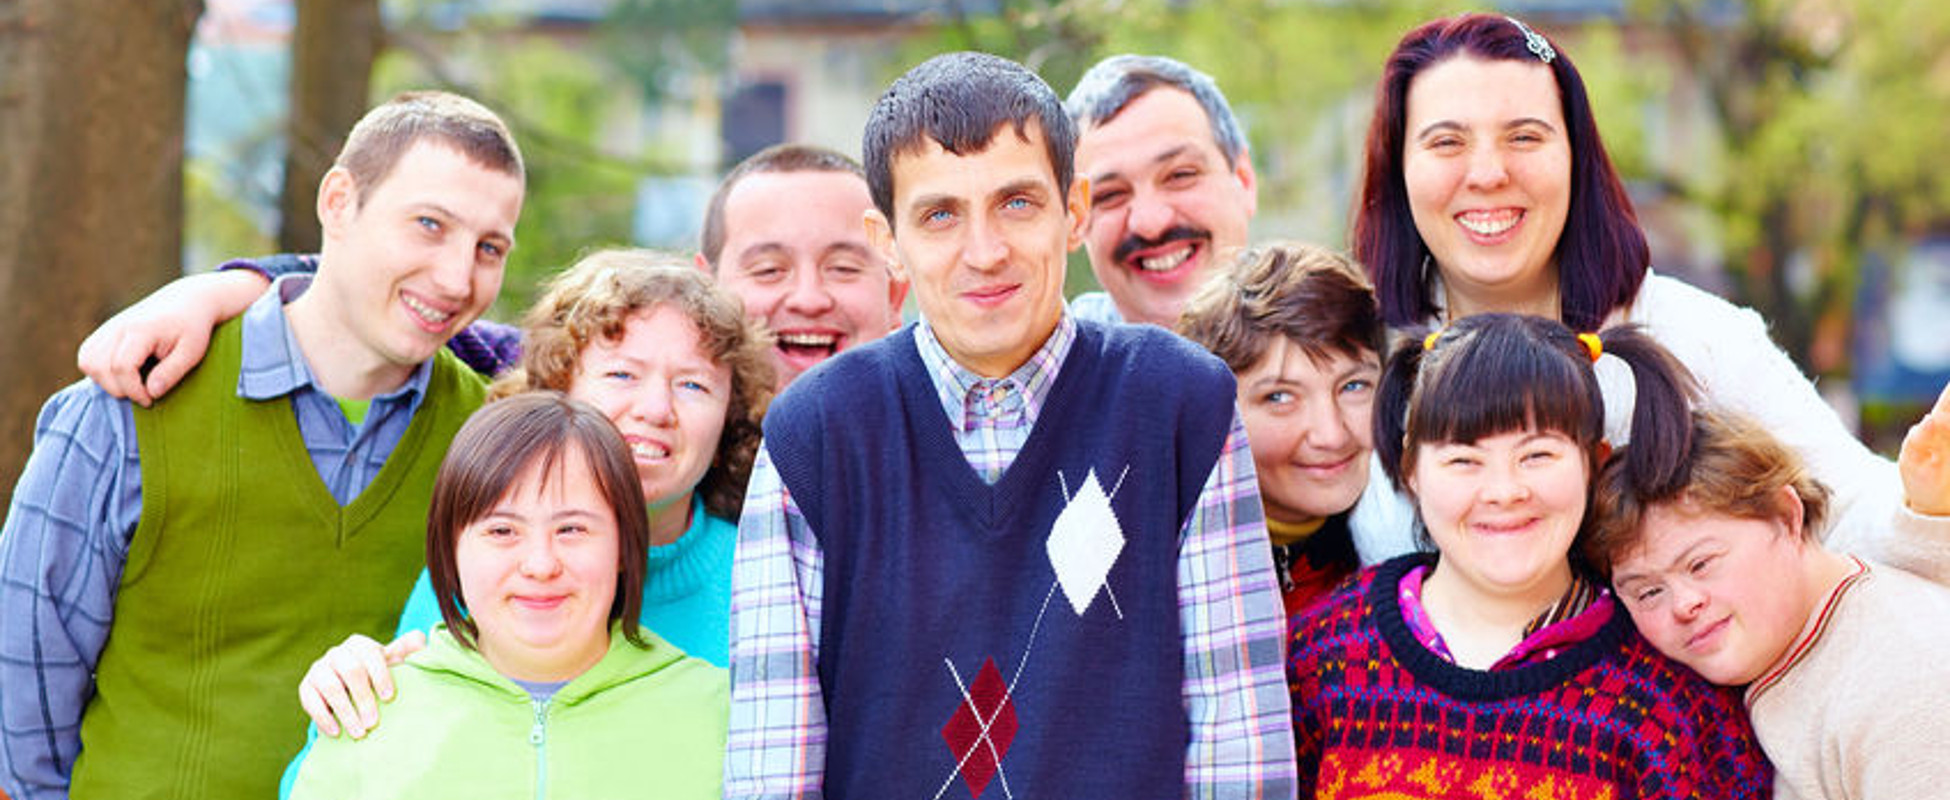 Buddies 4 Life: Group of people with intellectual disabilities outside in the sun